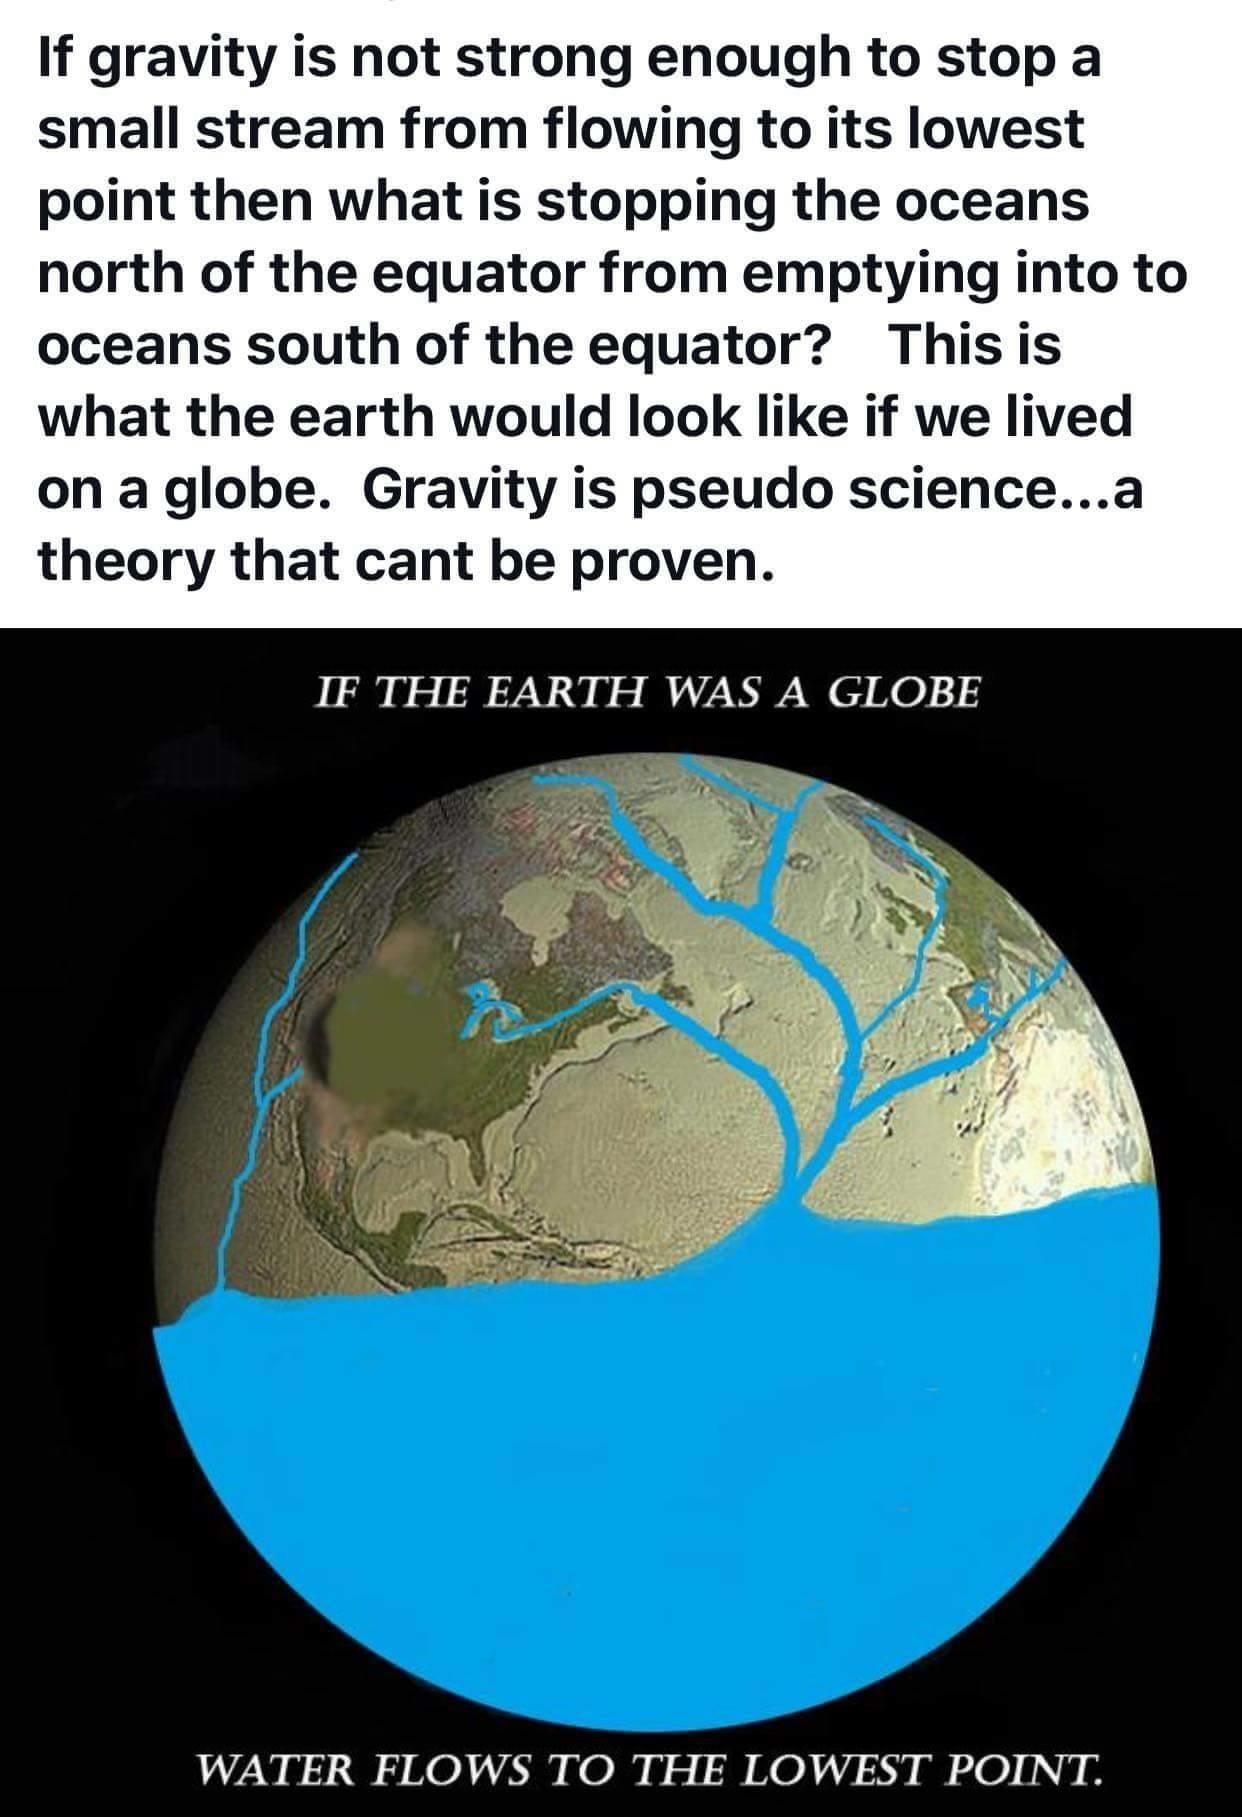 Flat earthers always make me laugh